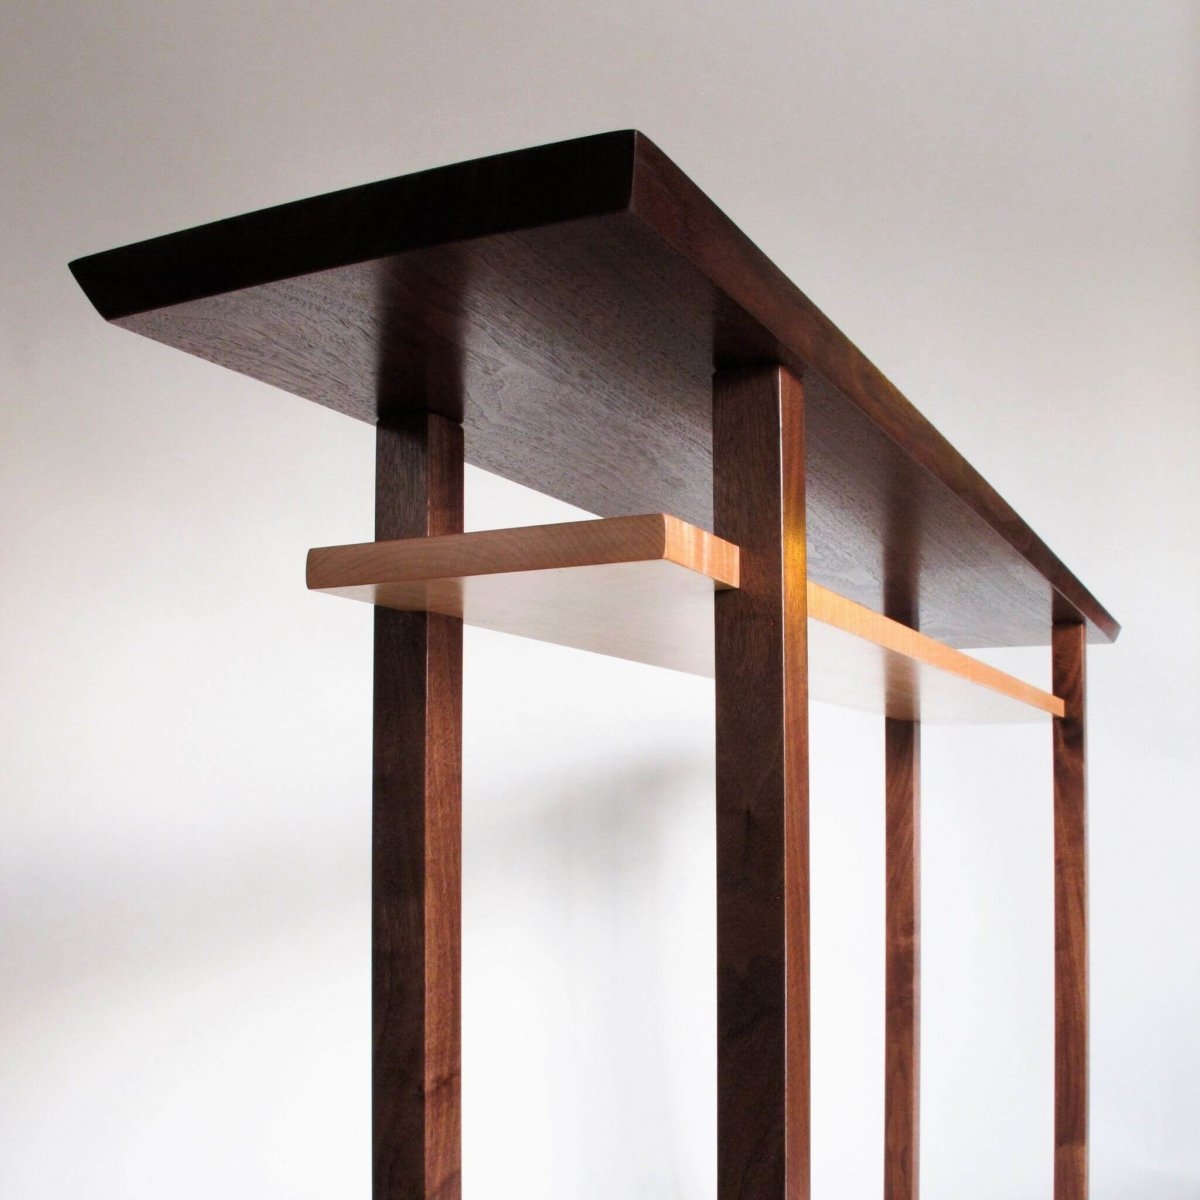 A modern wood furniture design, this skinny console table with shelf is perfect for your entryway table or hallway decorating.  Unique table designs from Mokuzai Furniture